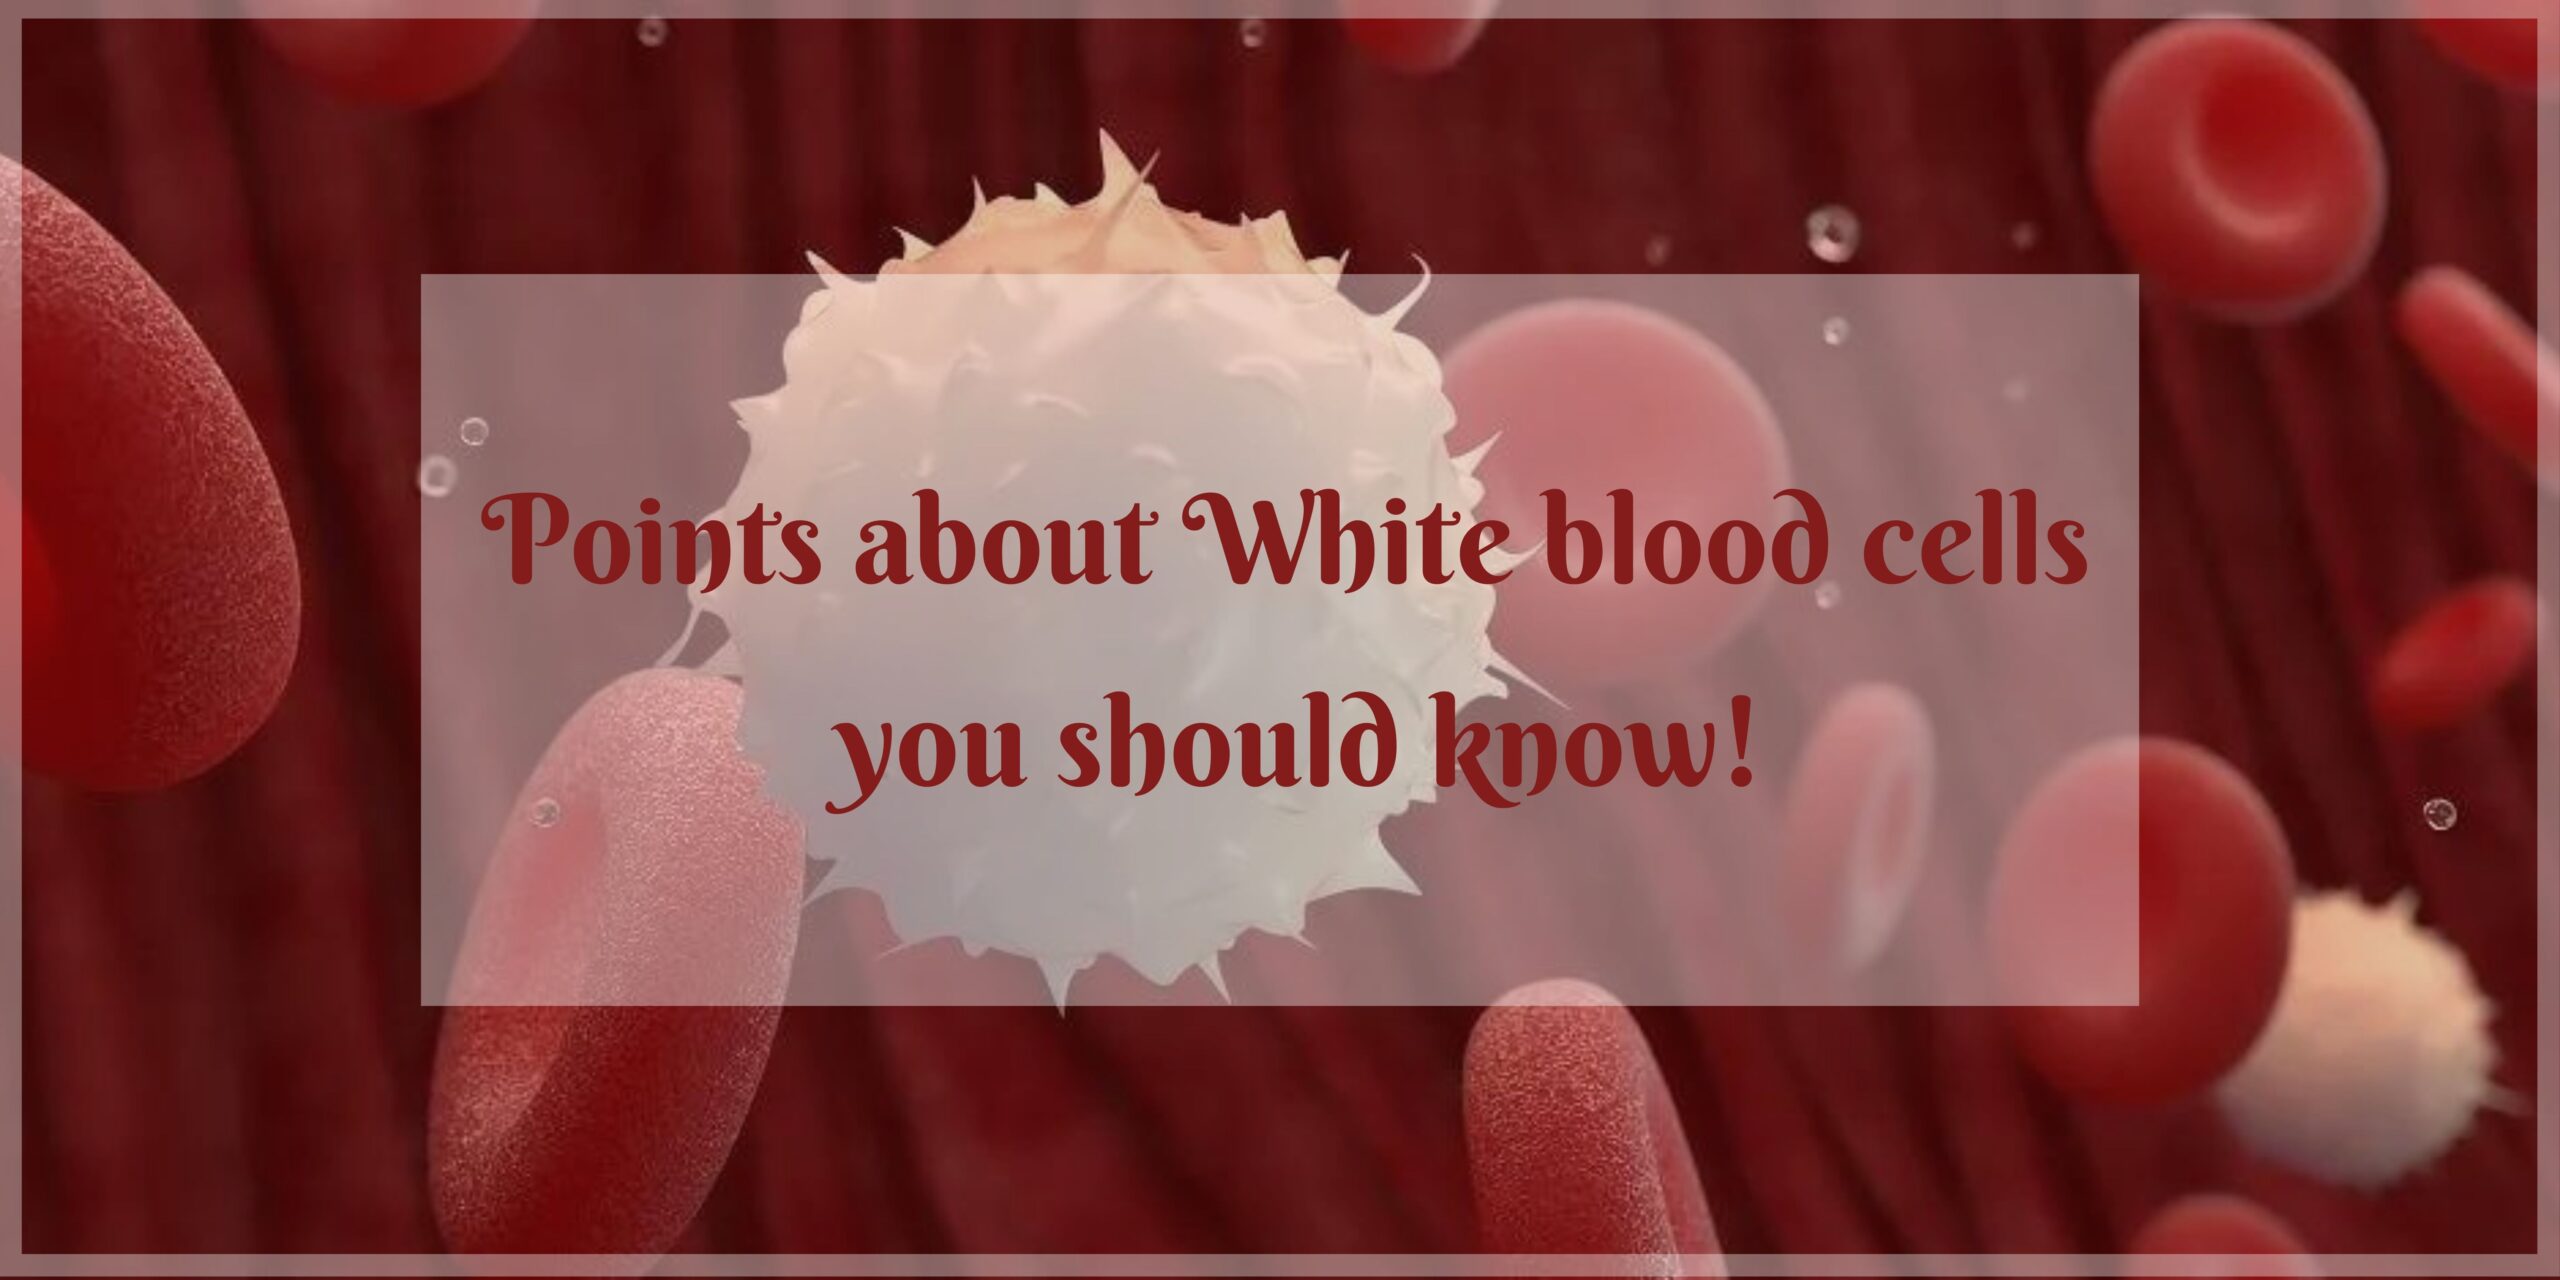 Points about White blood cells you should know!